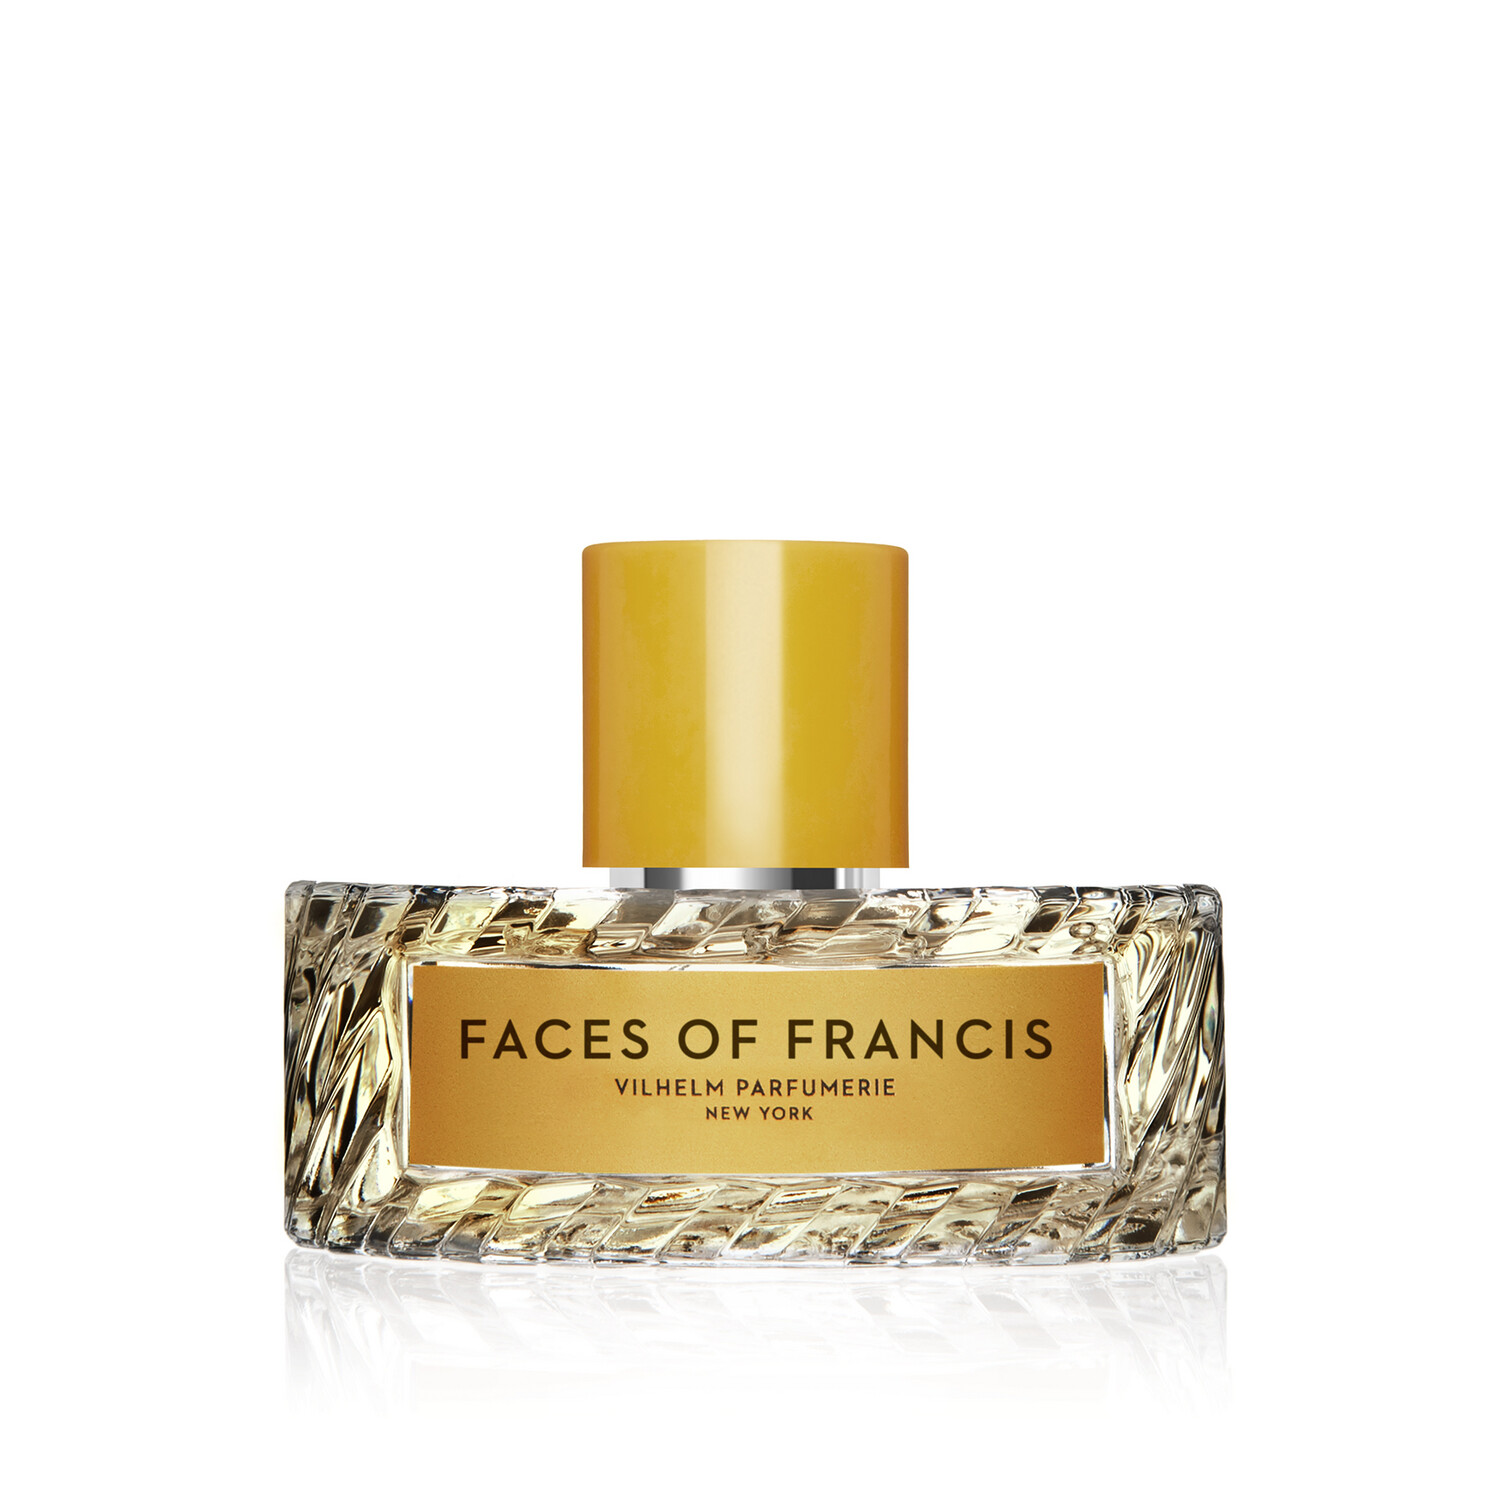 Faces of Francis 100ml, Size: 100ml